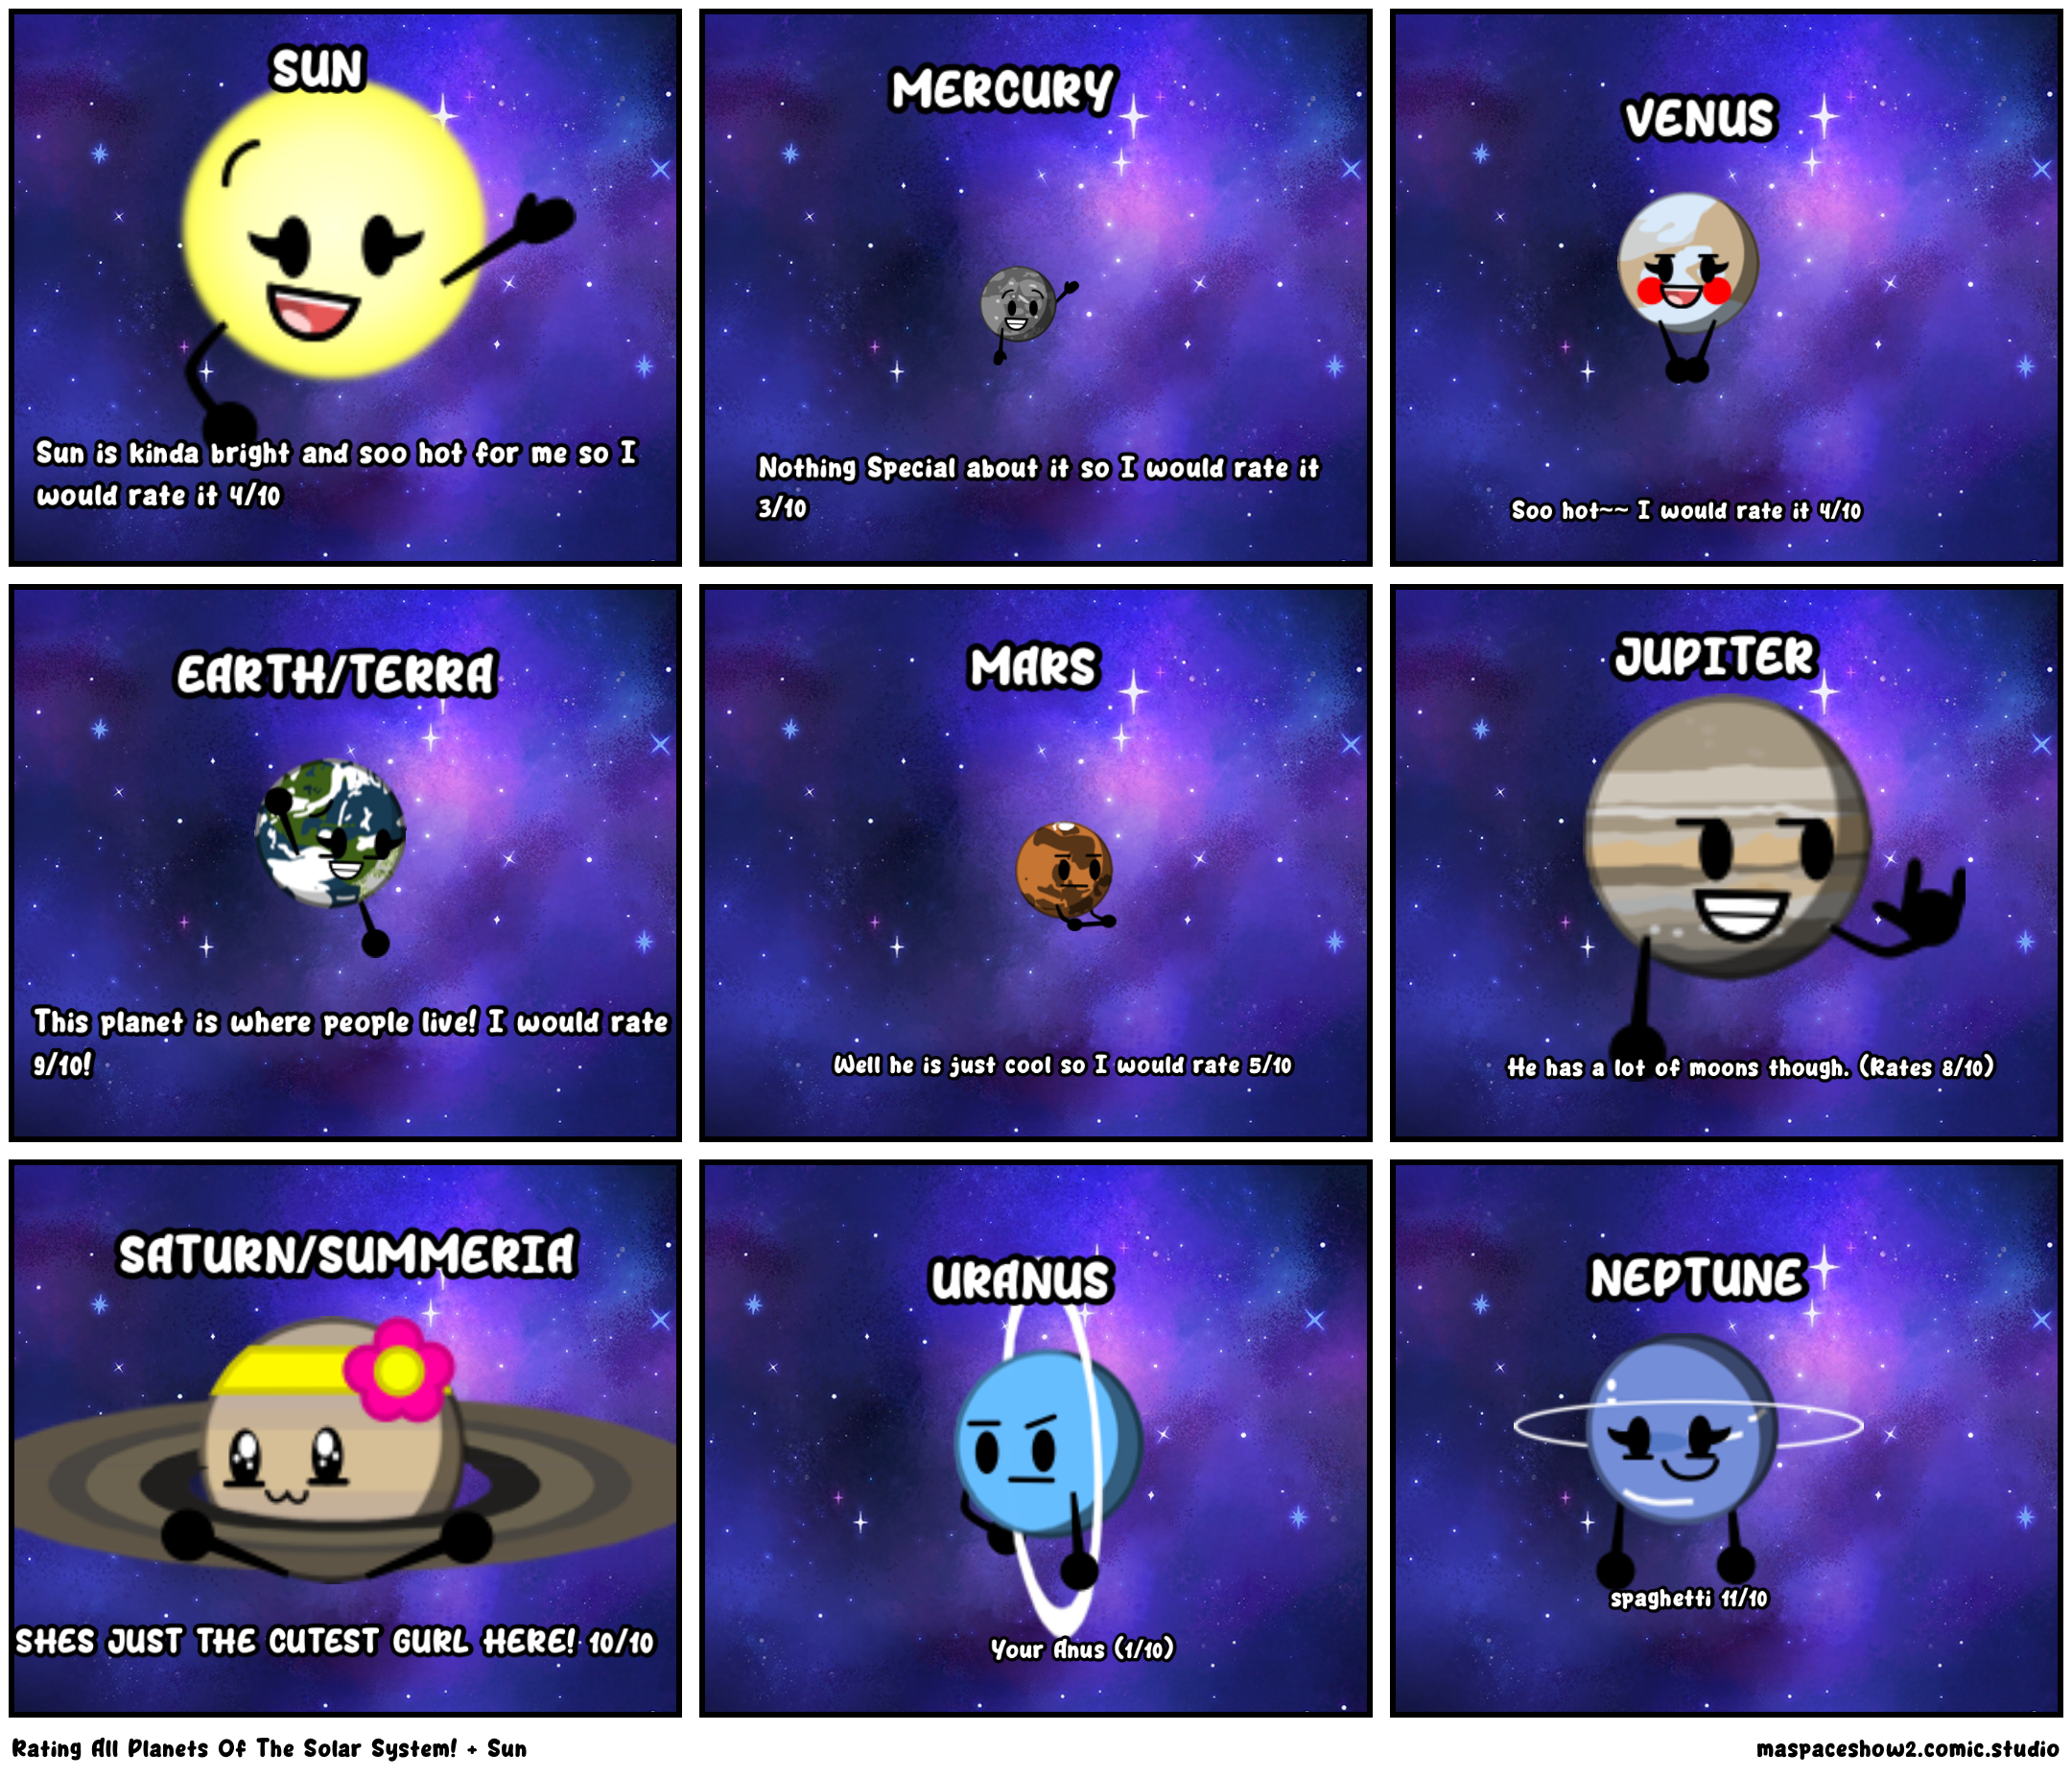 Rating All Planets Of The Solar System! + Sun